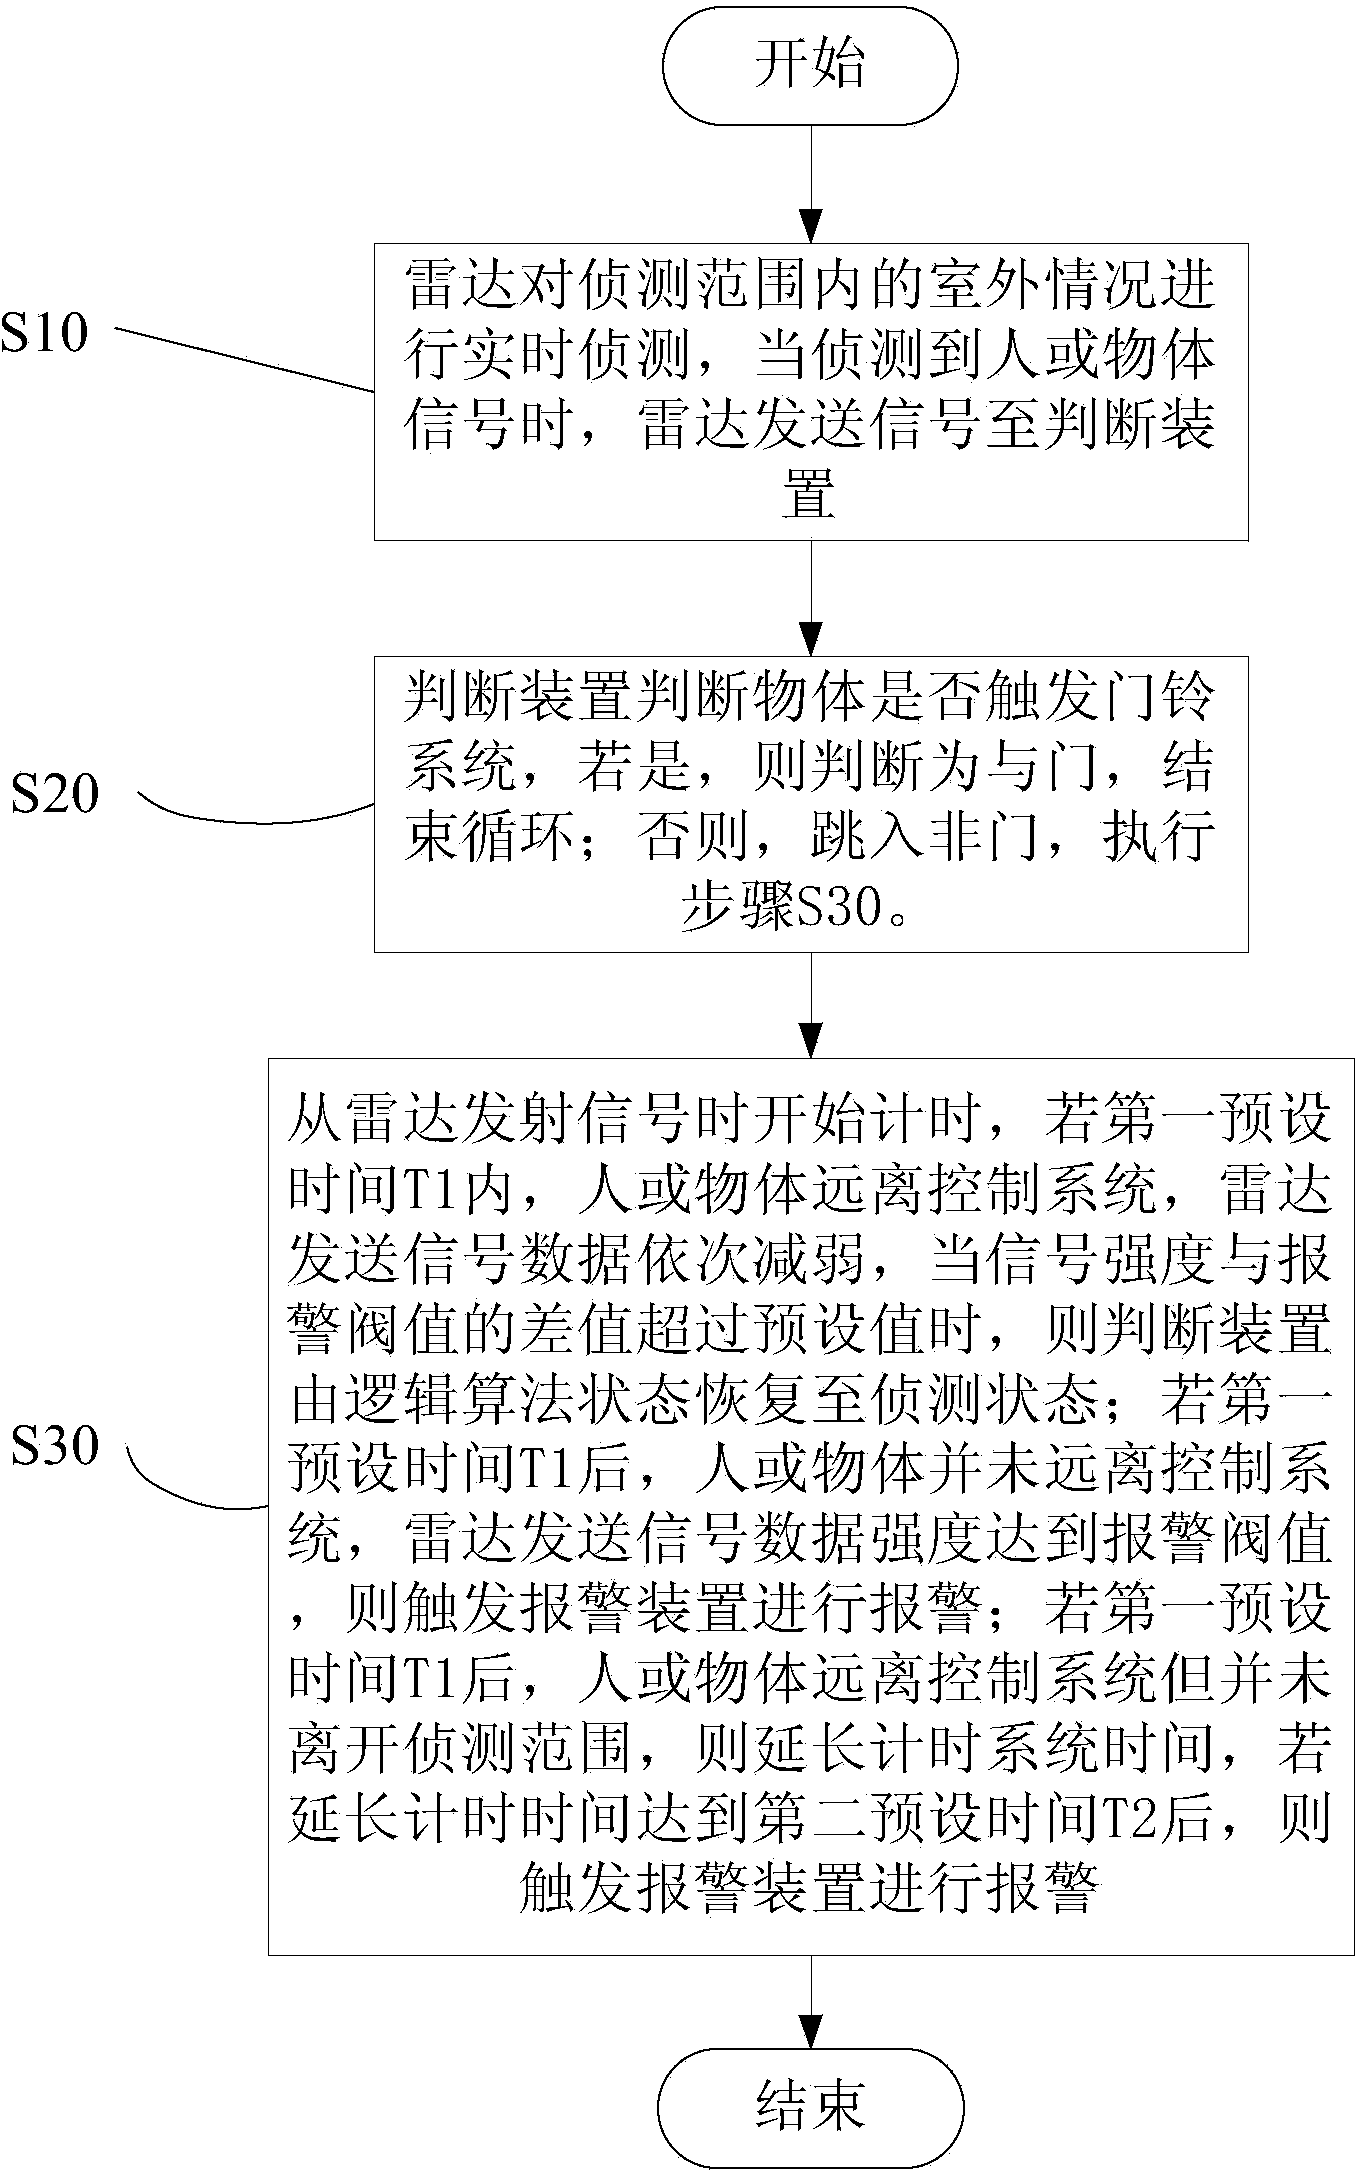 Active security entrance guard control method and control system